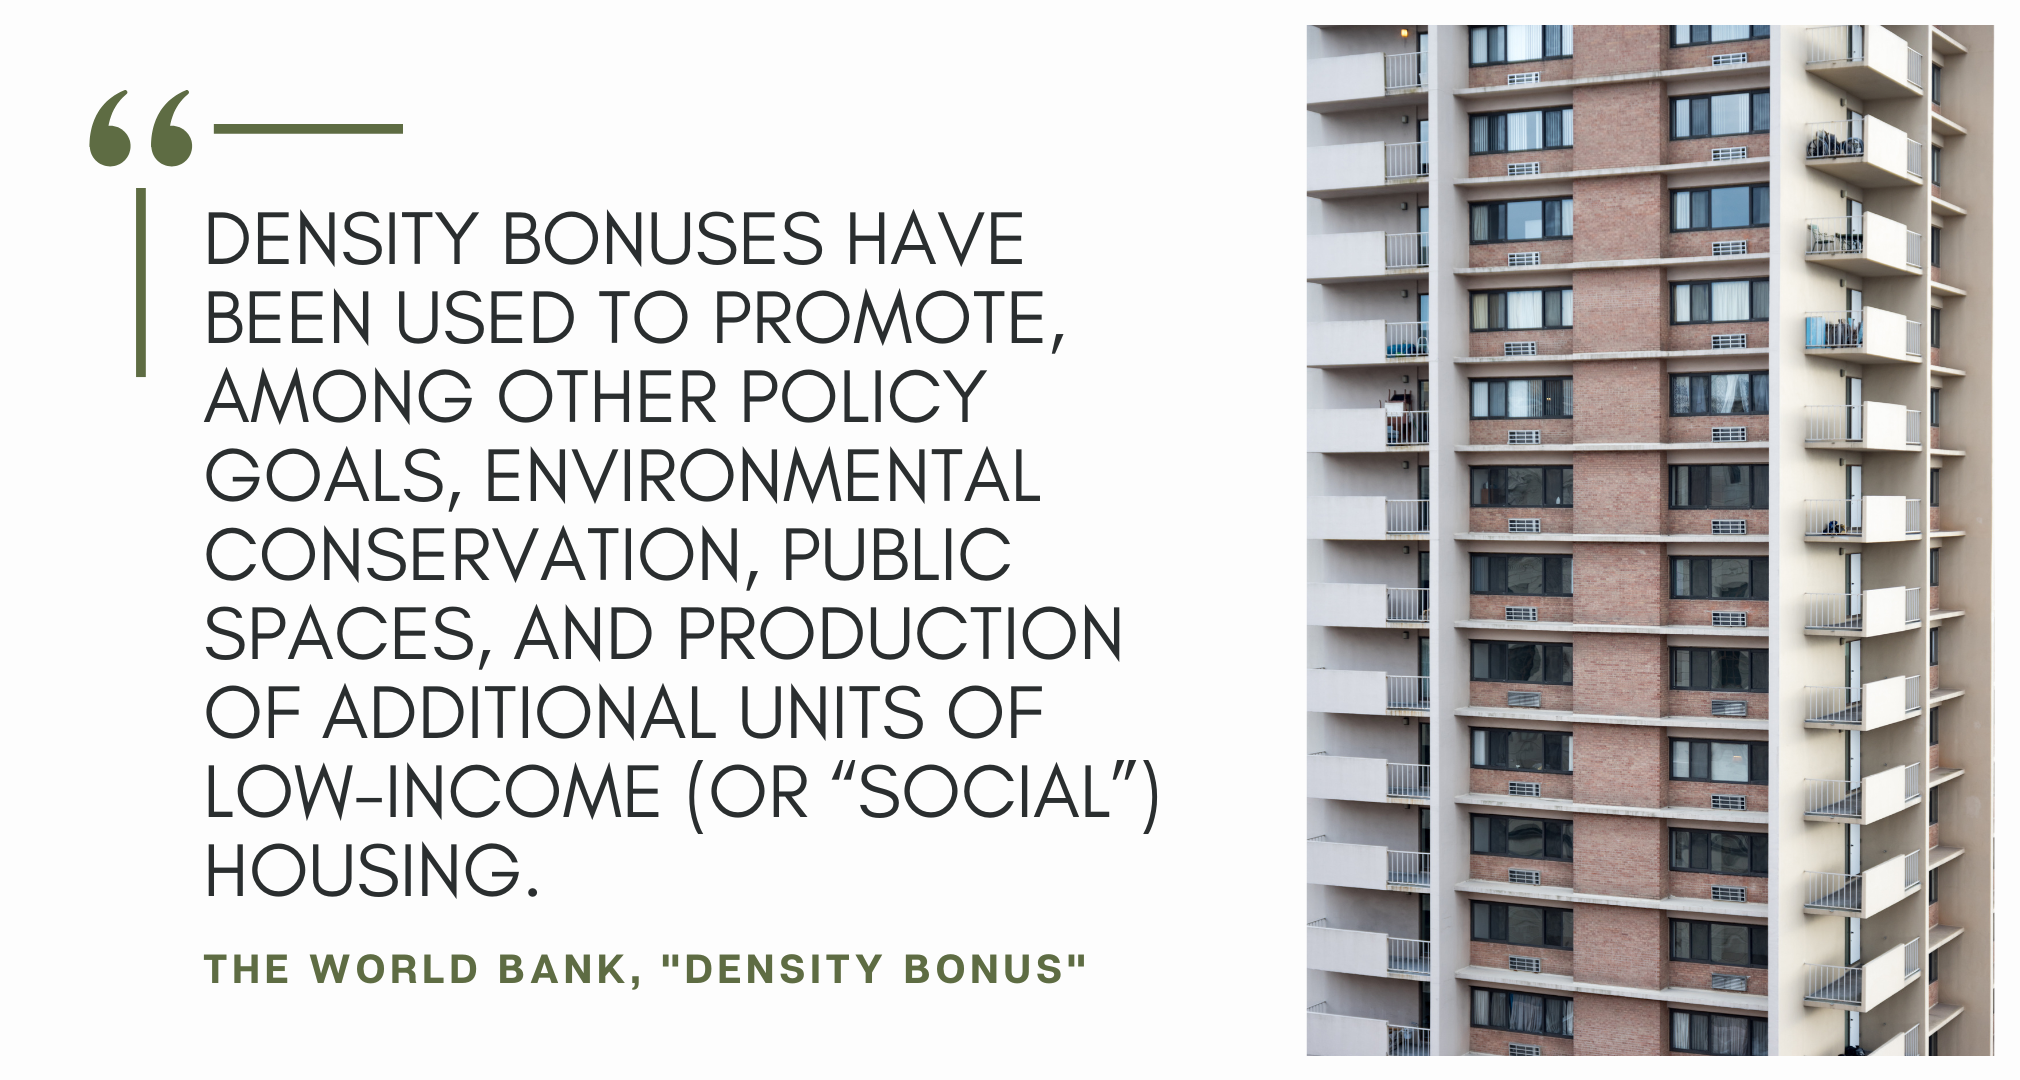 First on our list of cost savings for green building owners is density bonuses